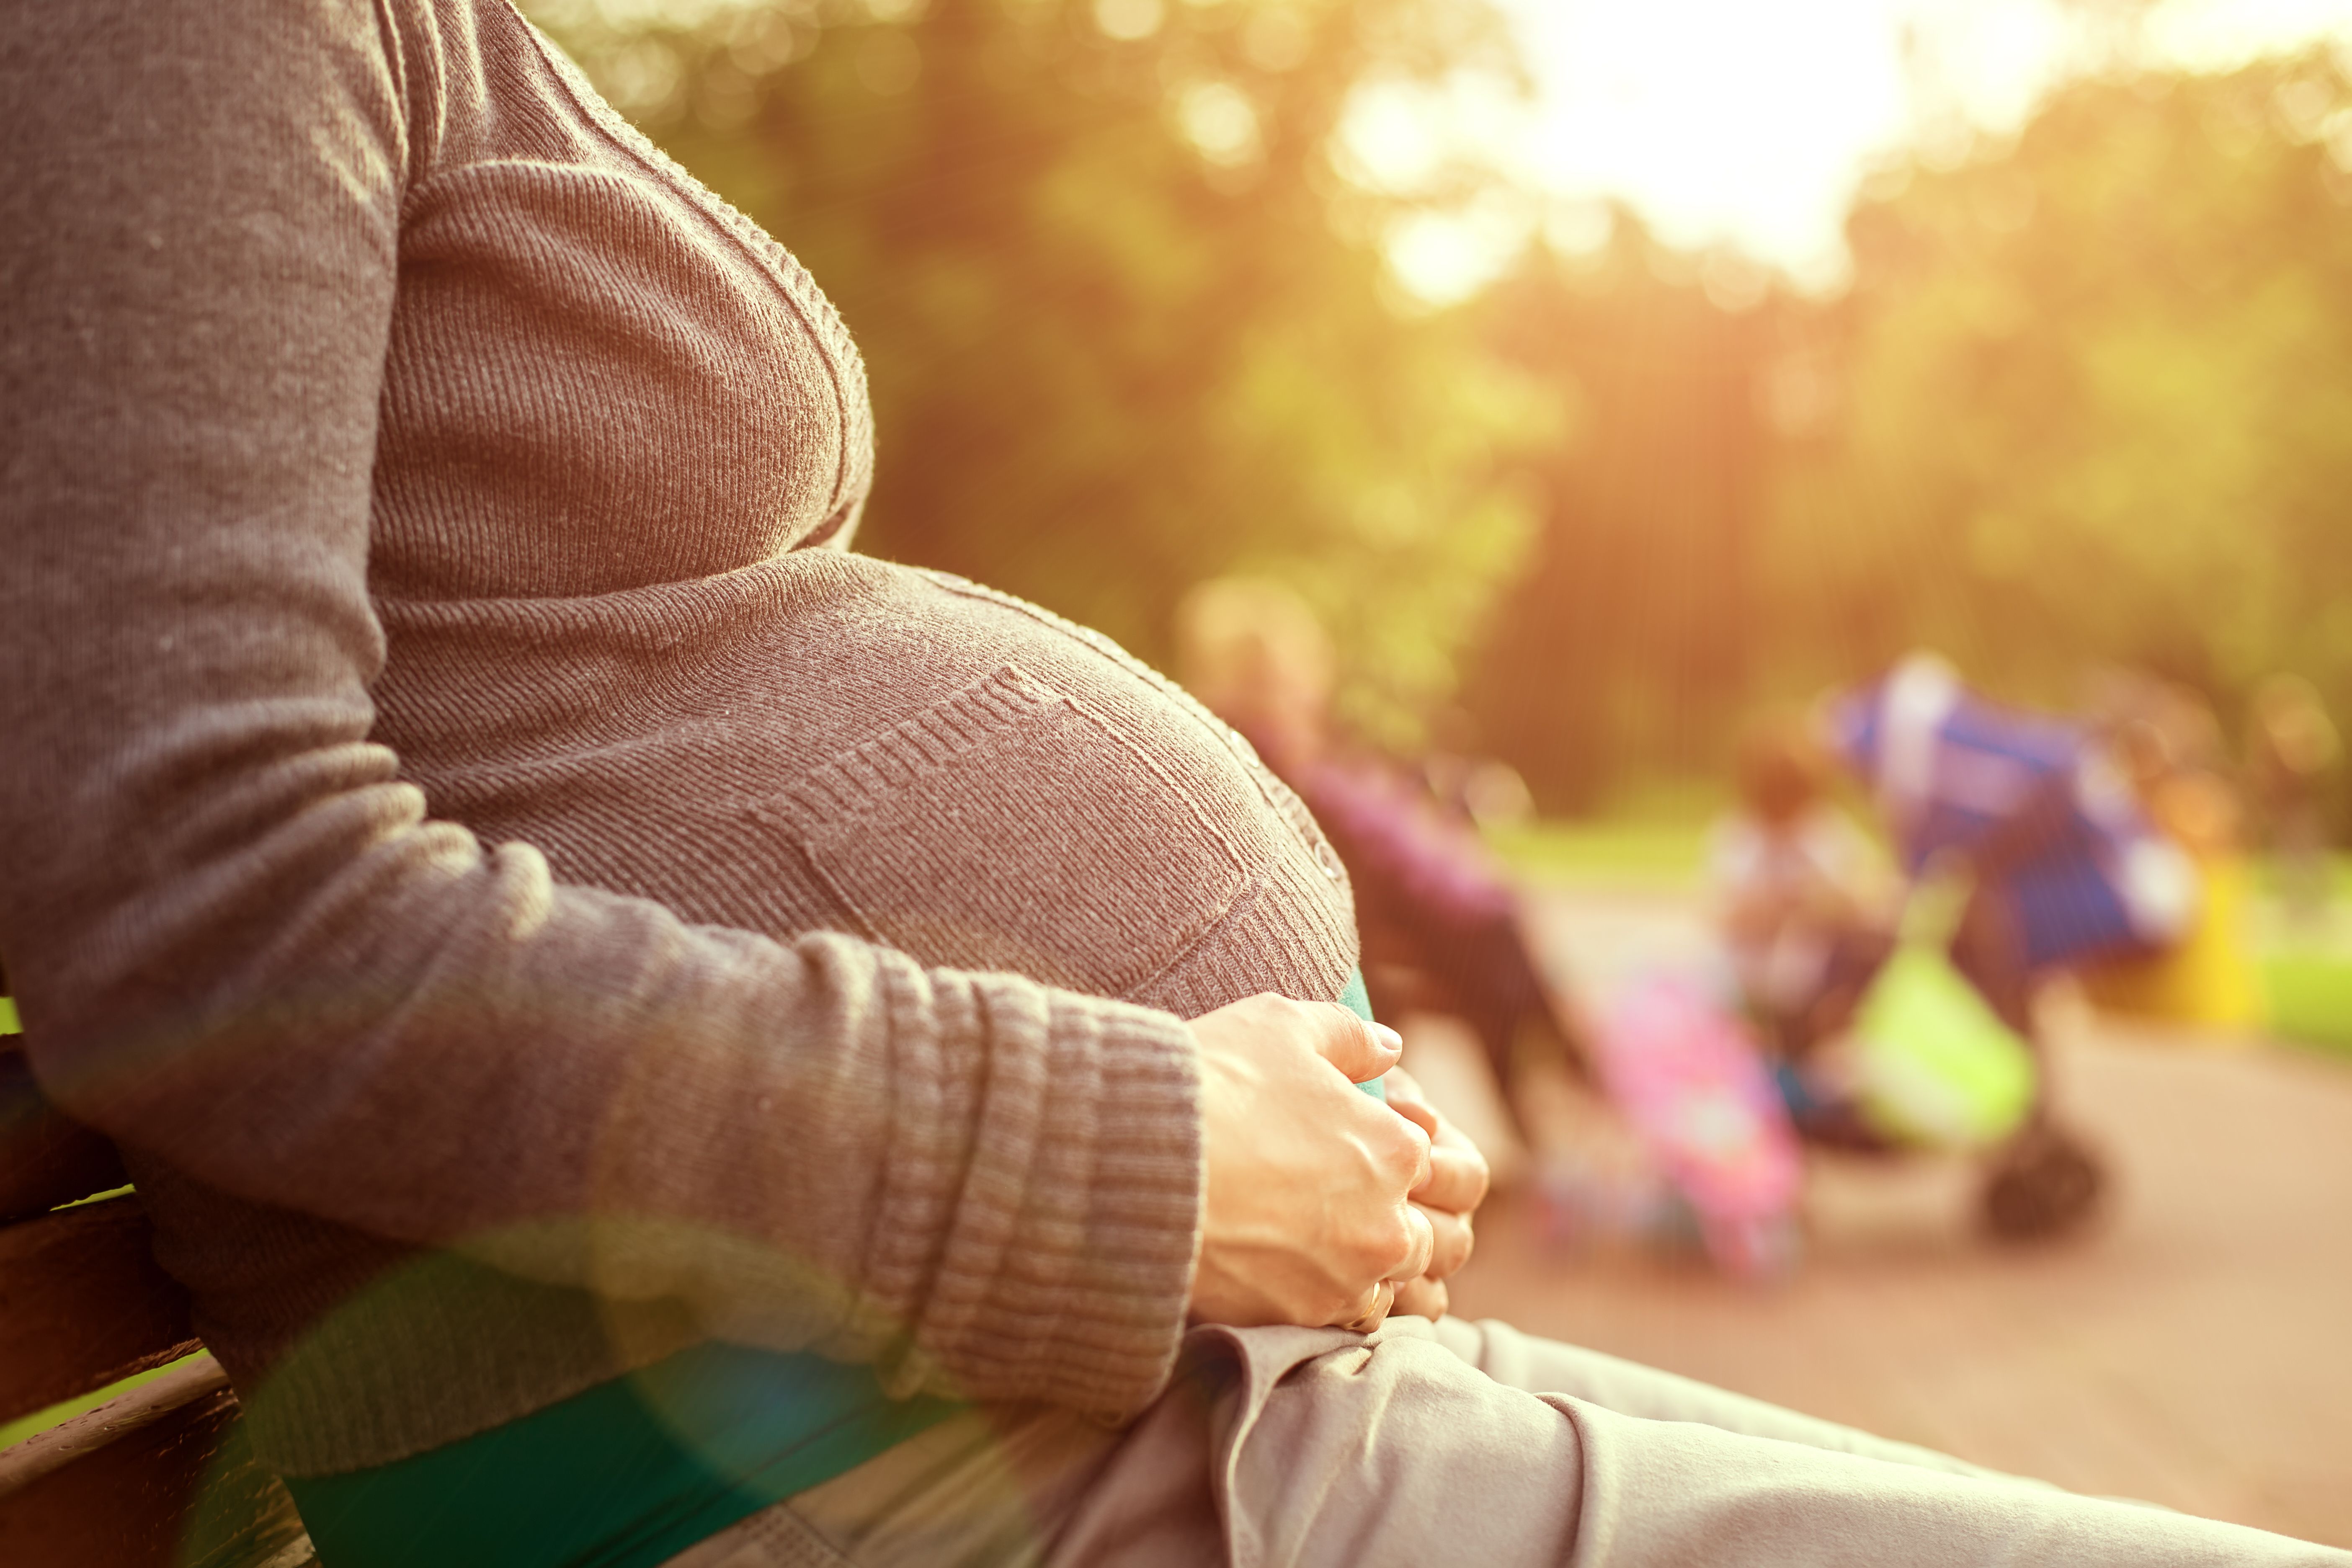 A pregnant woman holding her growing belly at the park. | Source: Shutterstock